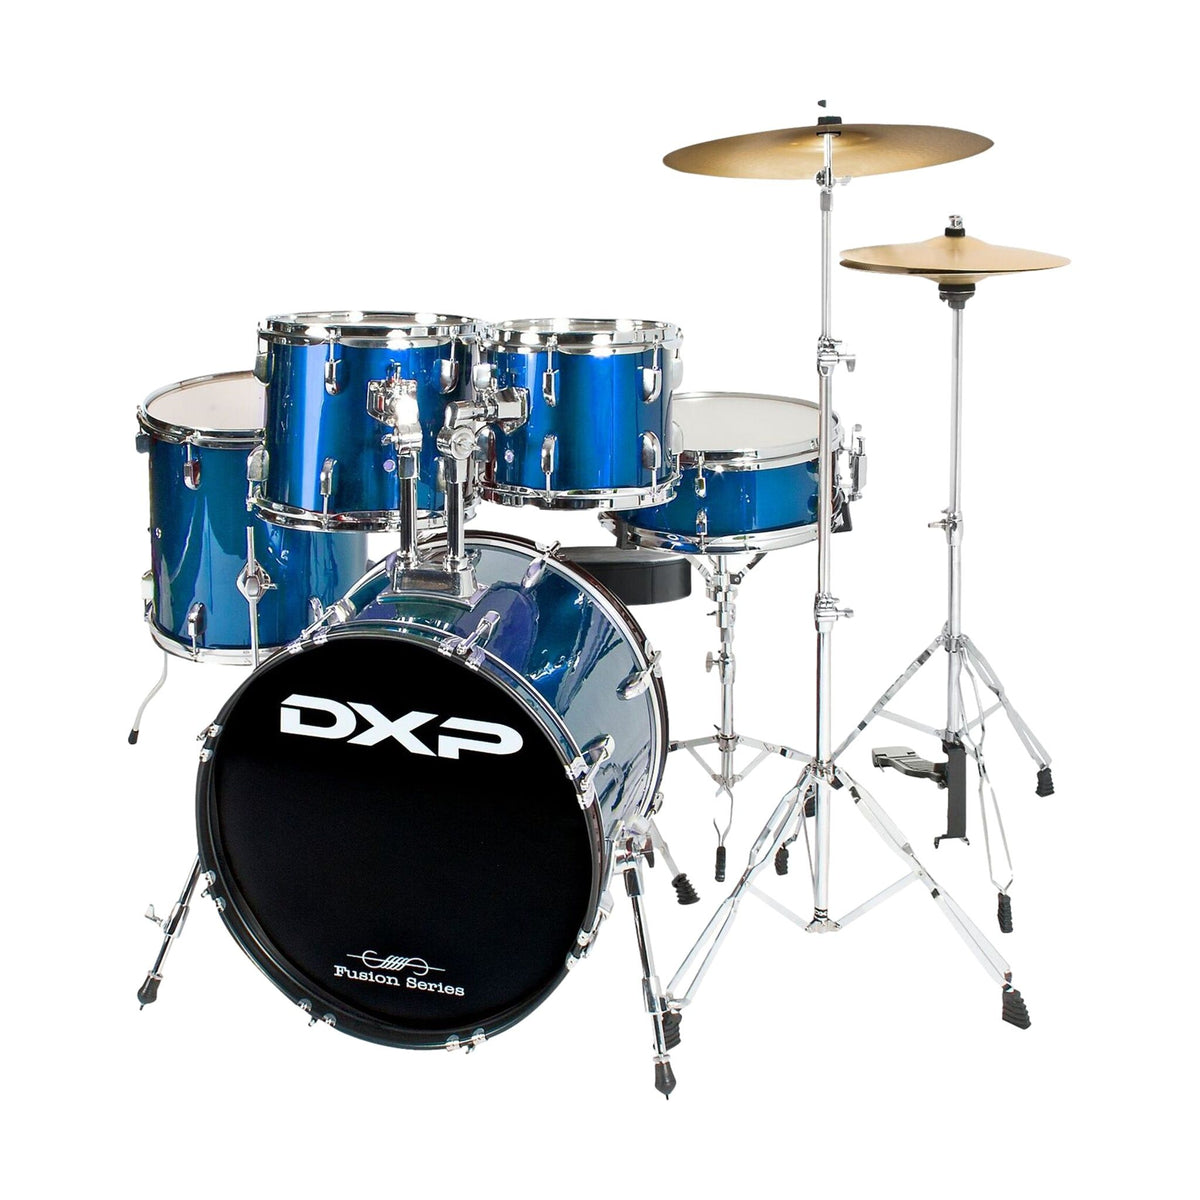 DXP Fusion 20in 5 Piece Drum Kit with Cymbals